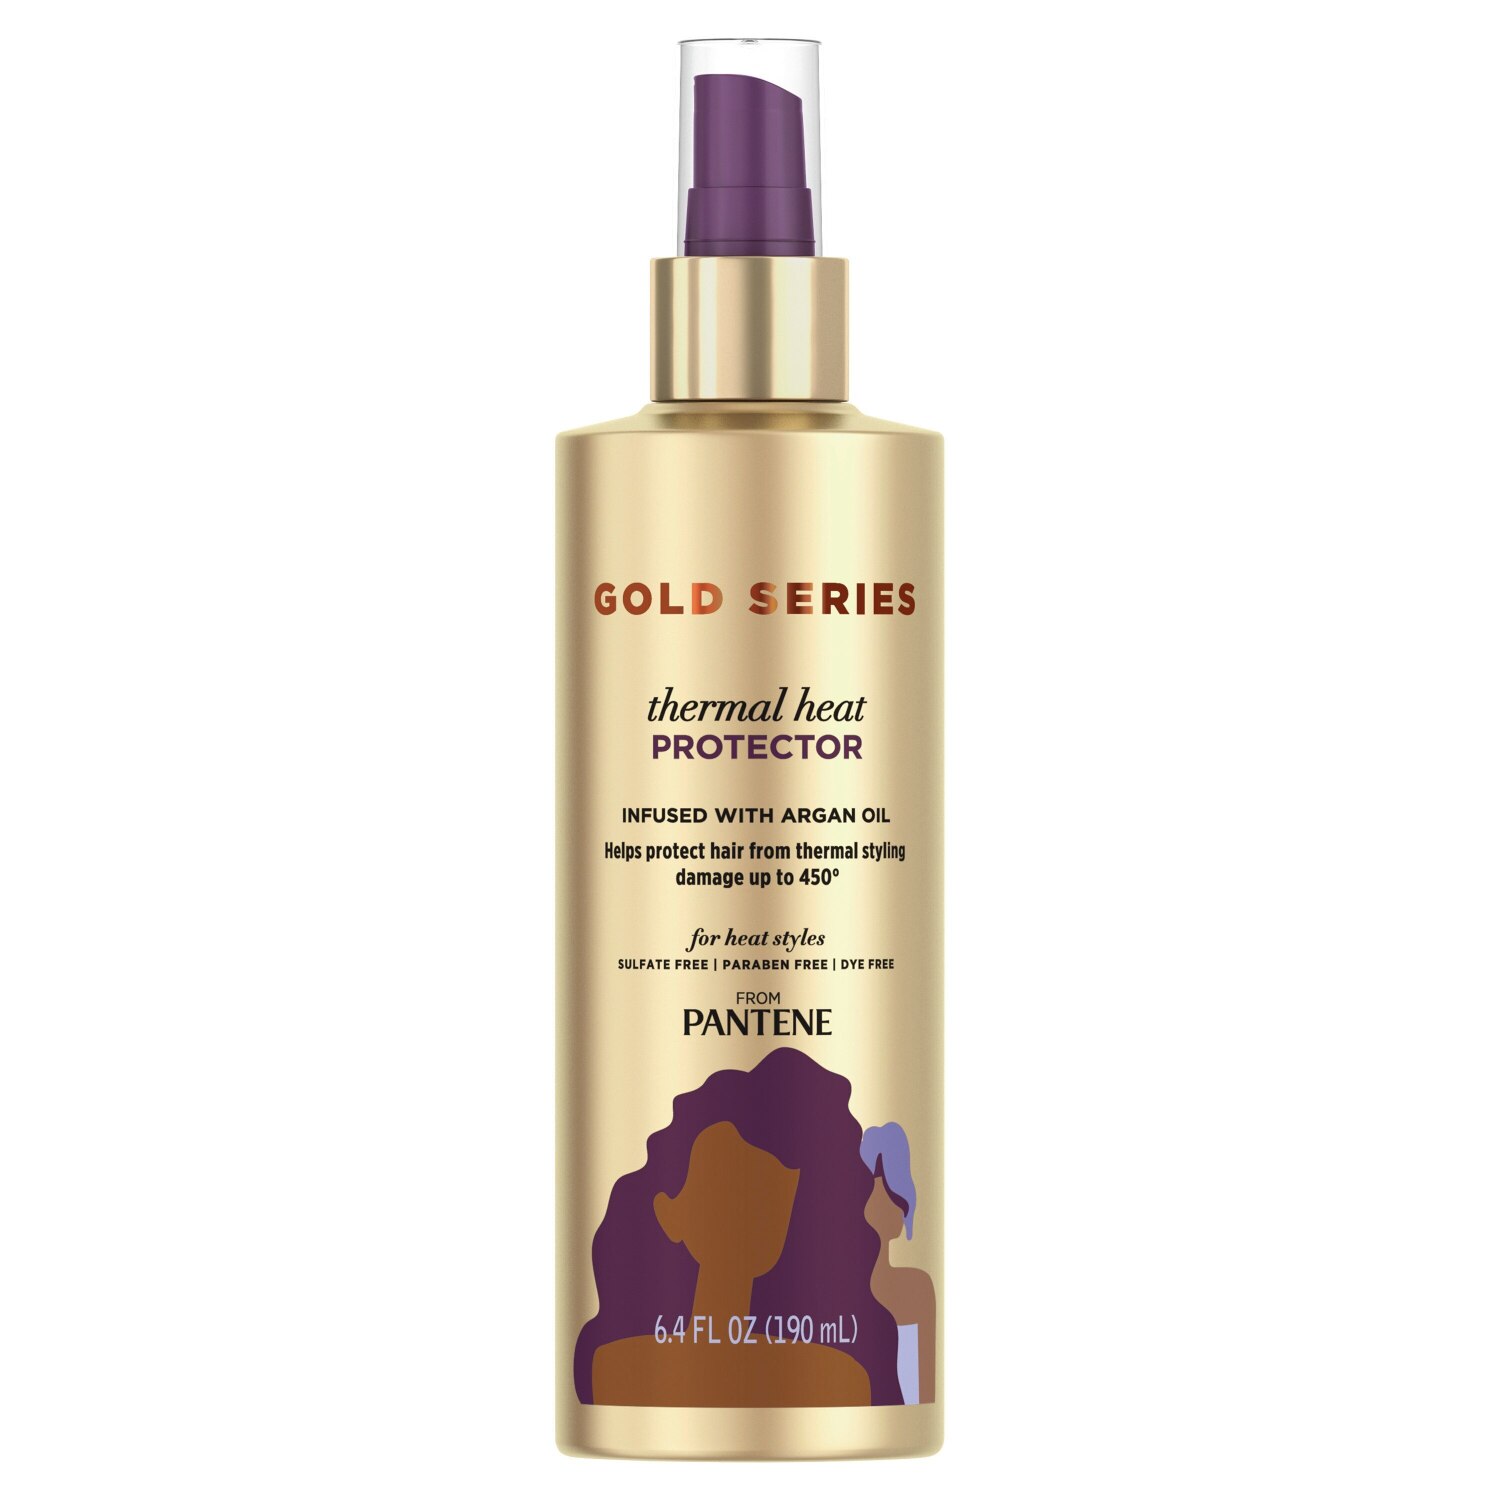 Gold Series from Pantene Sulfate-Free Thermal Heat Protector Infused with Argan Oil for Curly, Coily Hair, 6.4 OZ